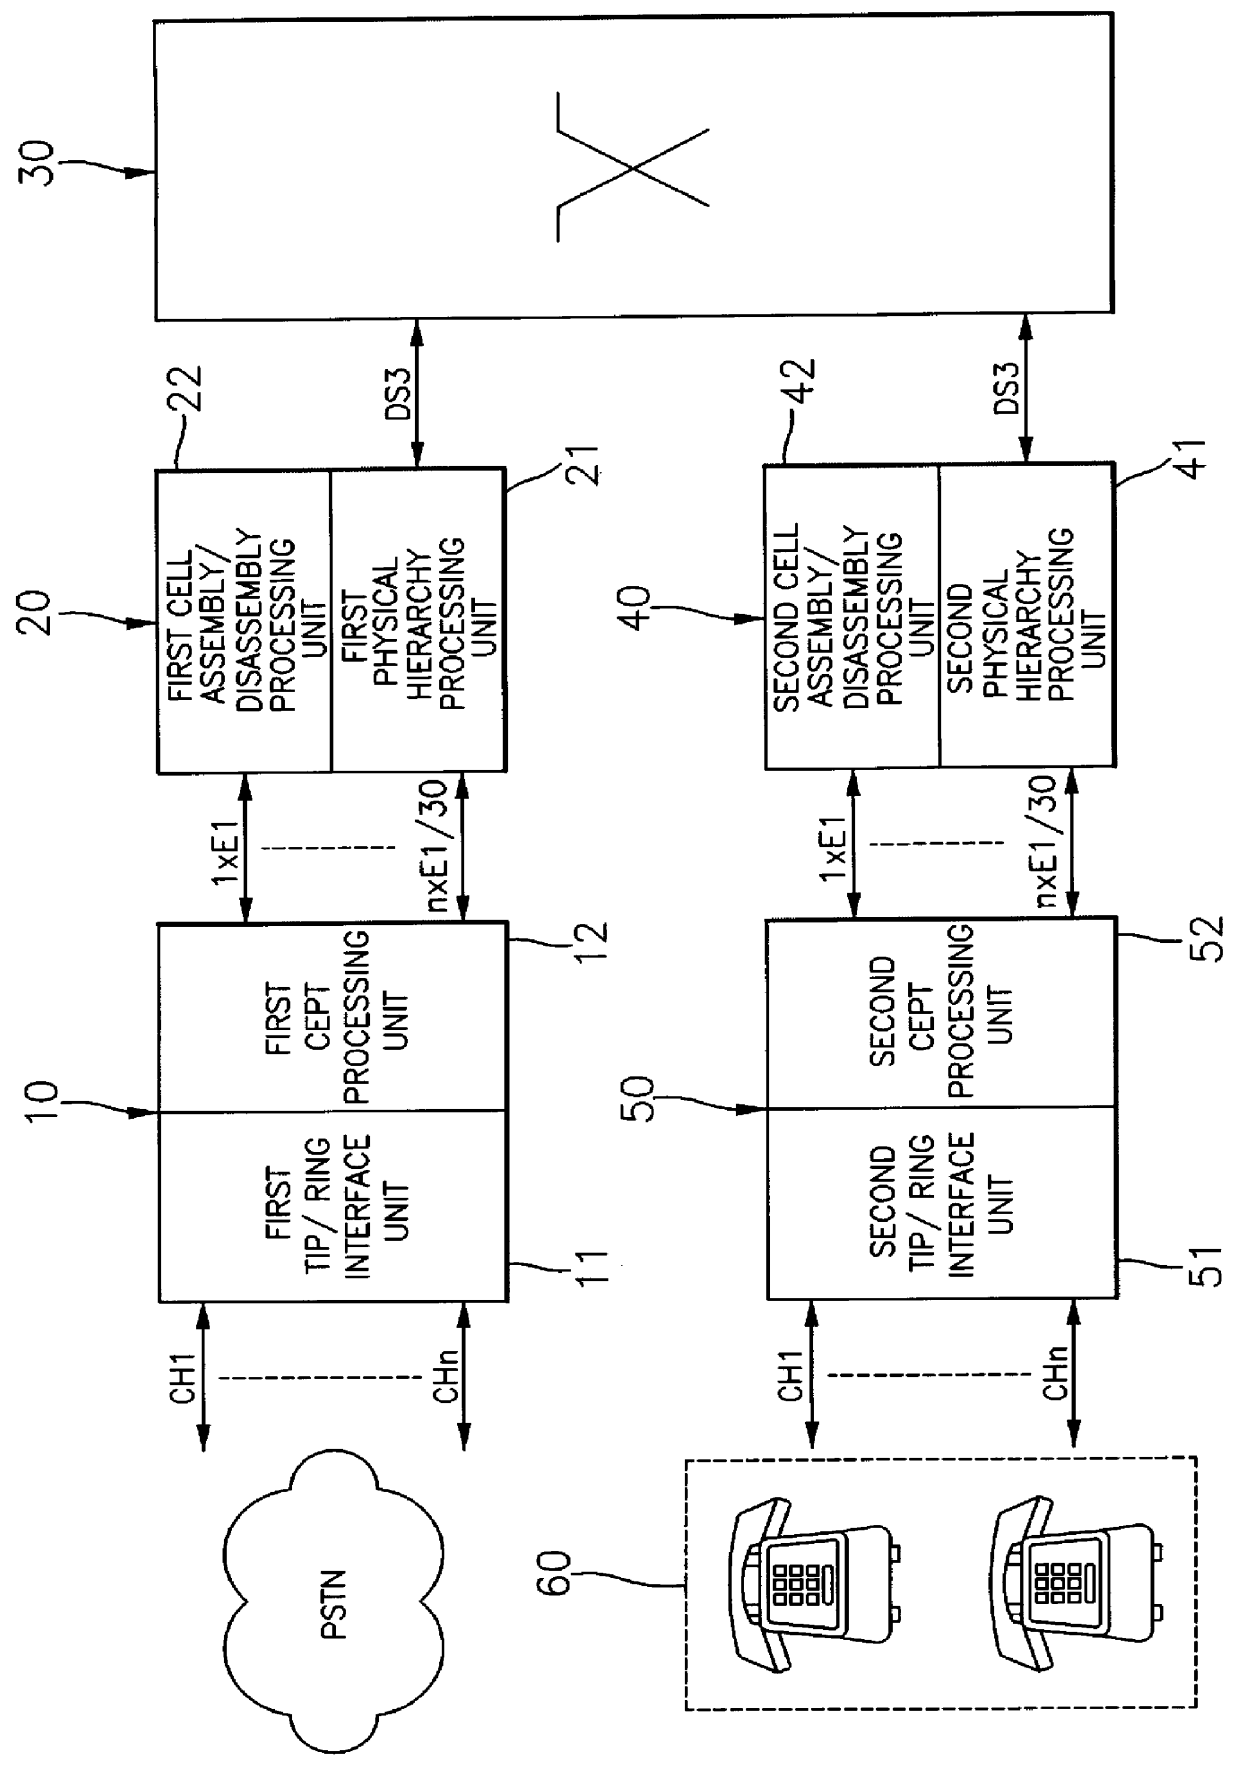 Telephone service system in a asynchronous transfer mode private network